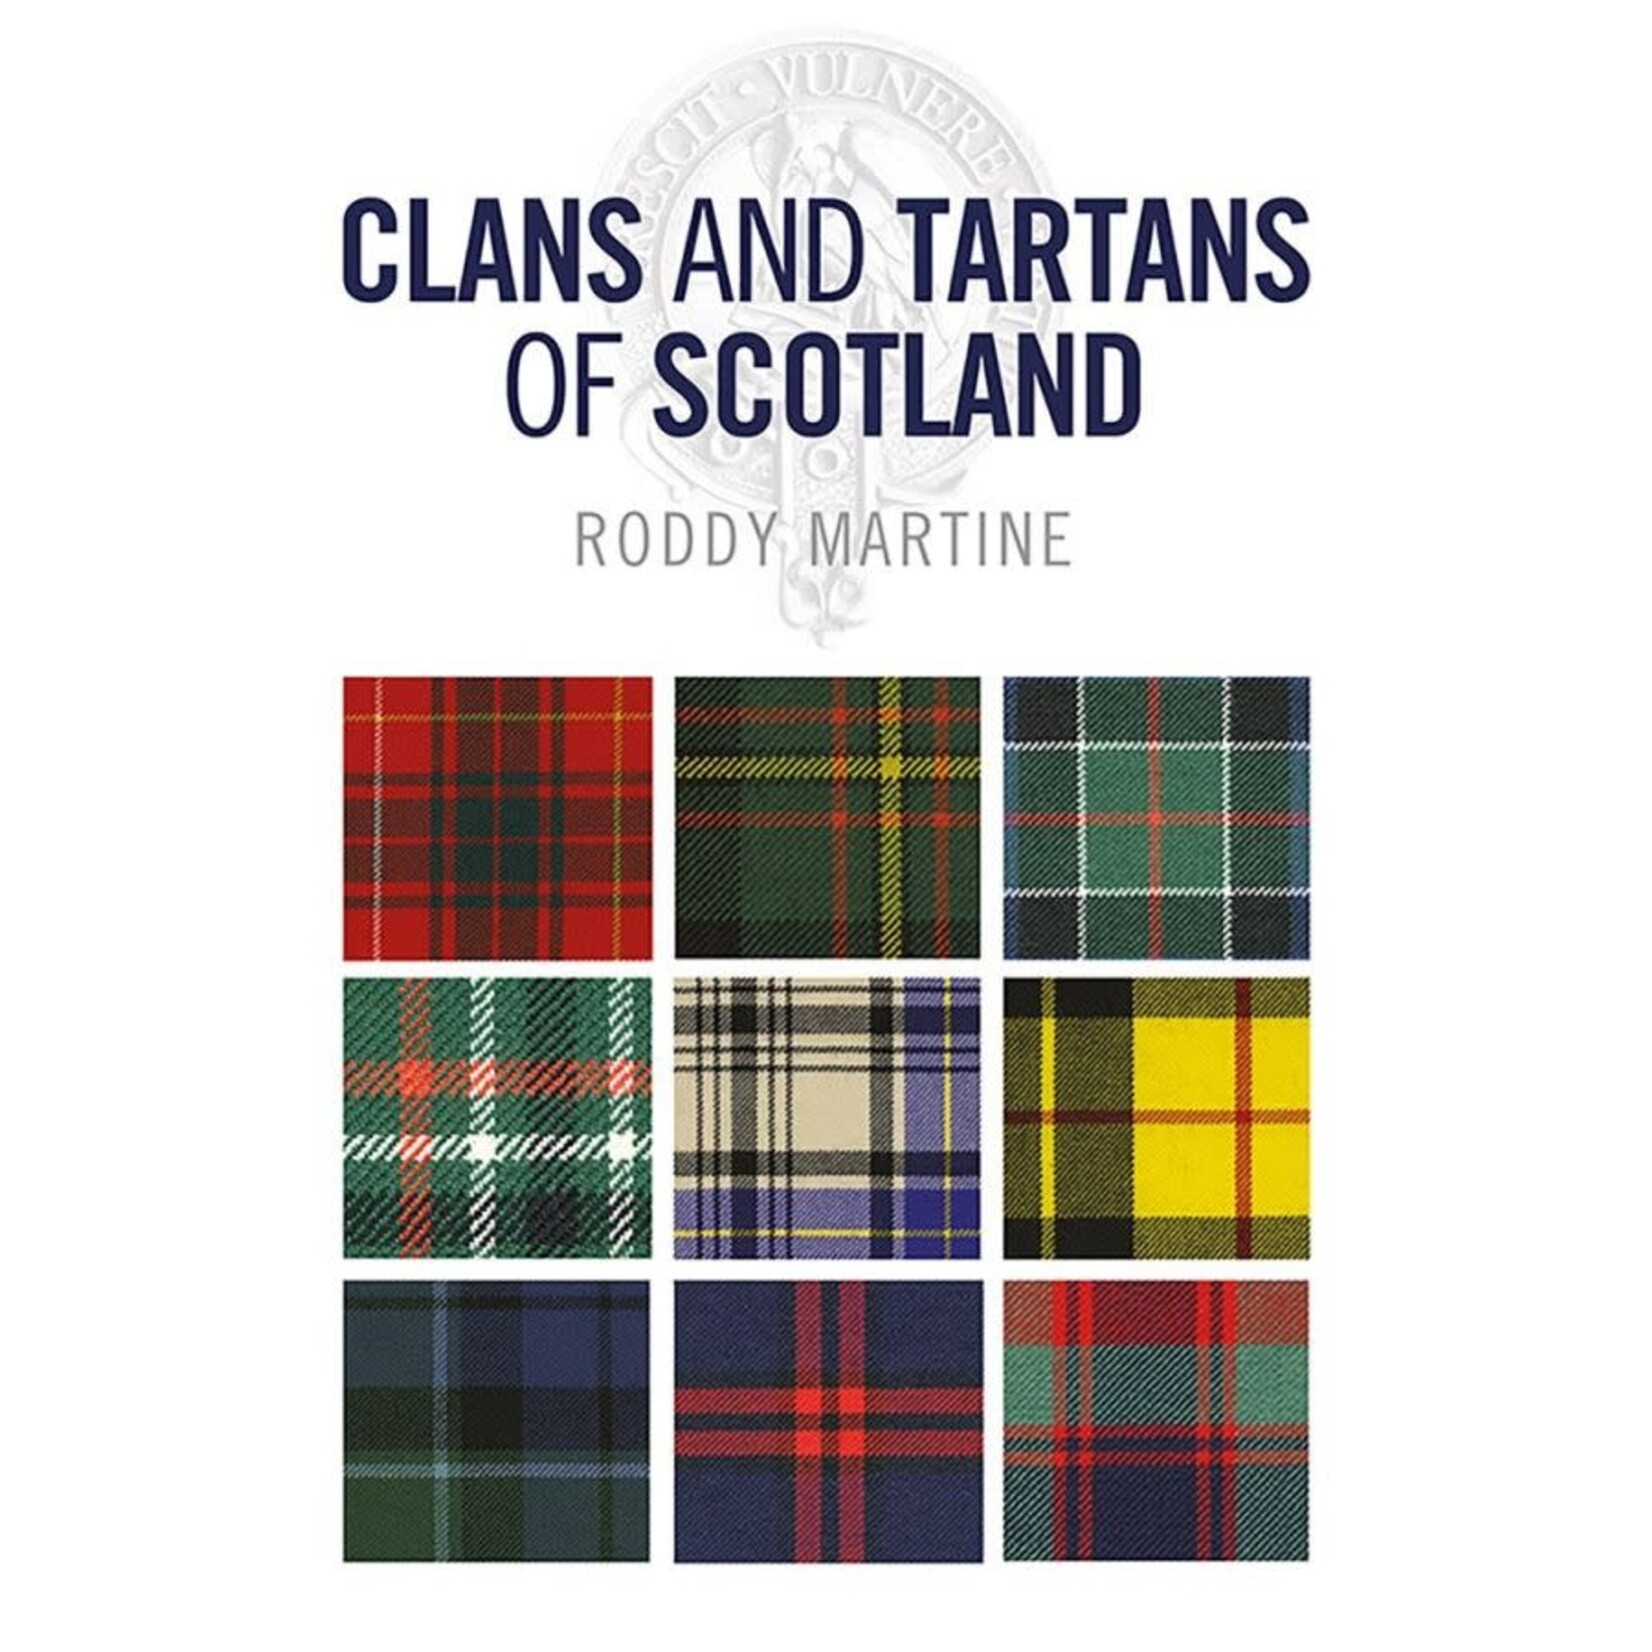 Celtic Books "Clans and Tartans From Scotland"